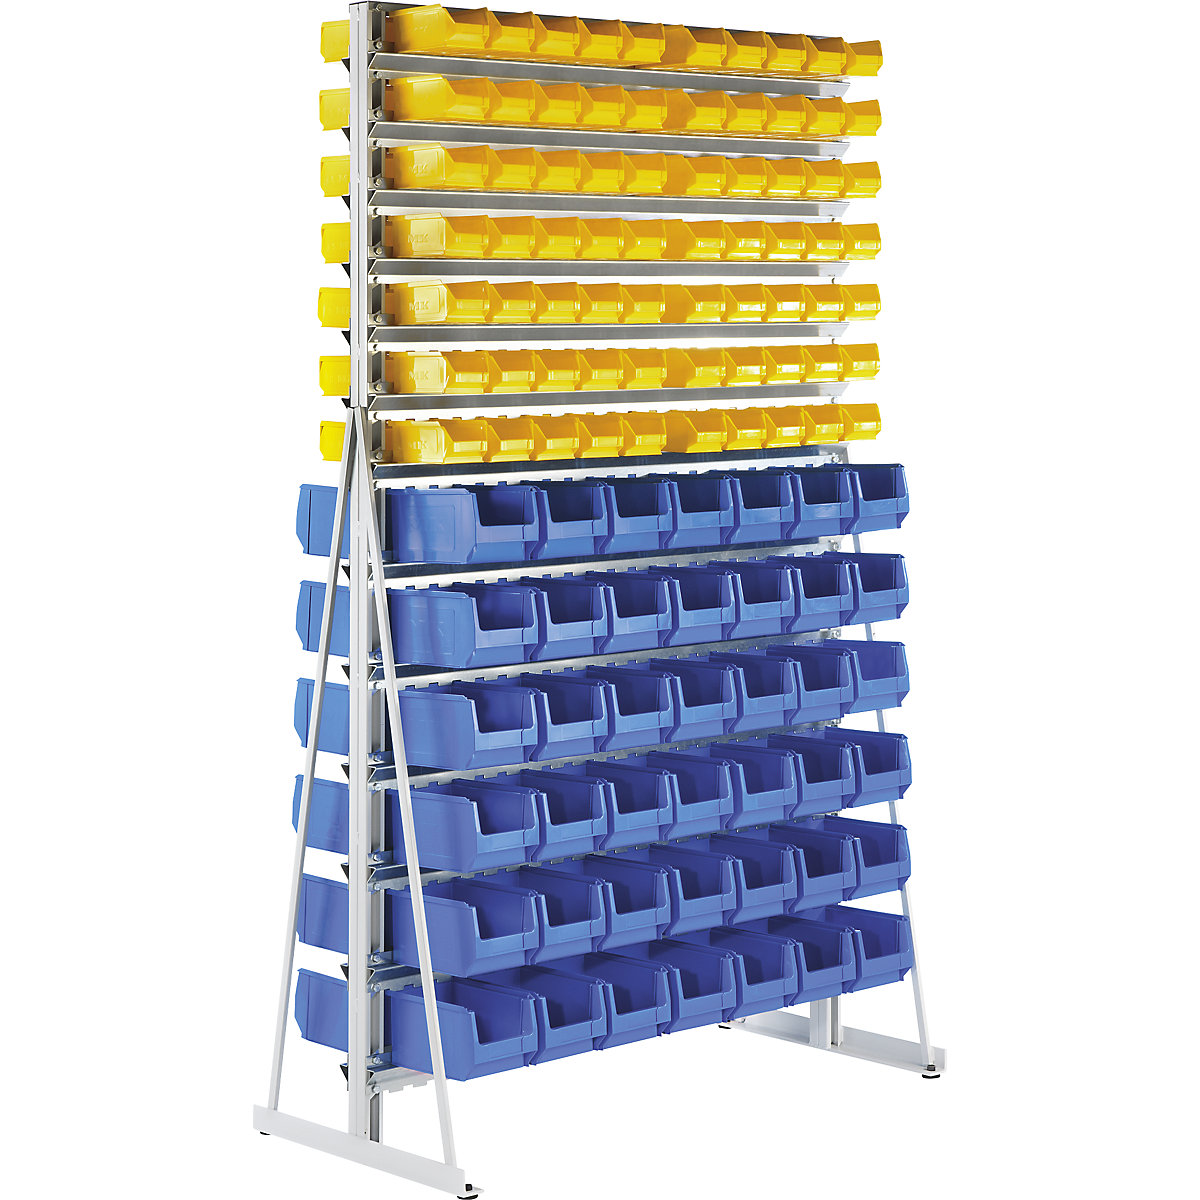 Free-standing small parts shelf unit with open fronted storage bins – eurokraft pro